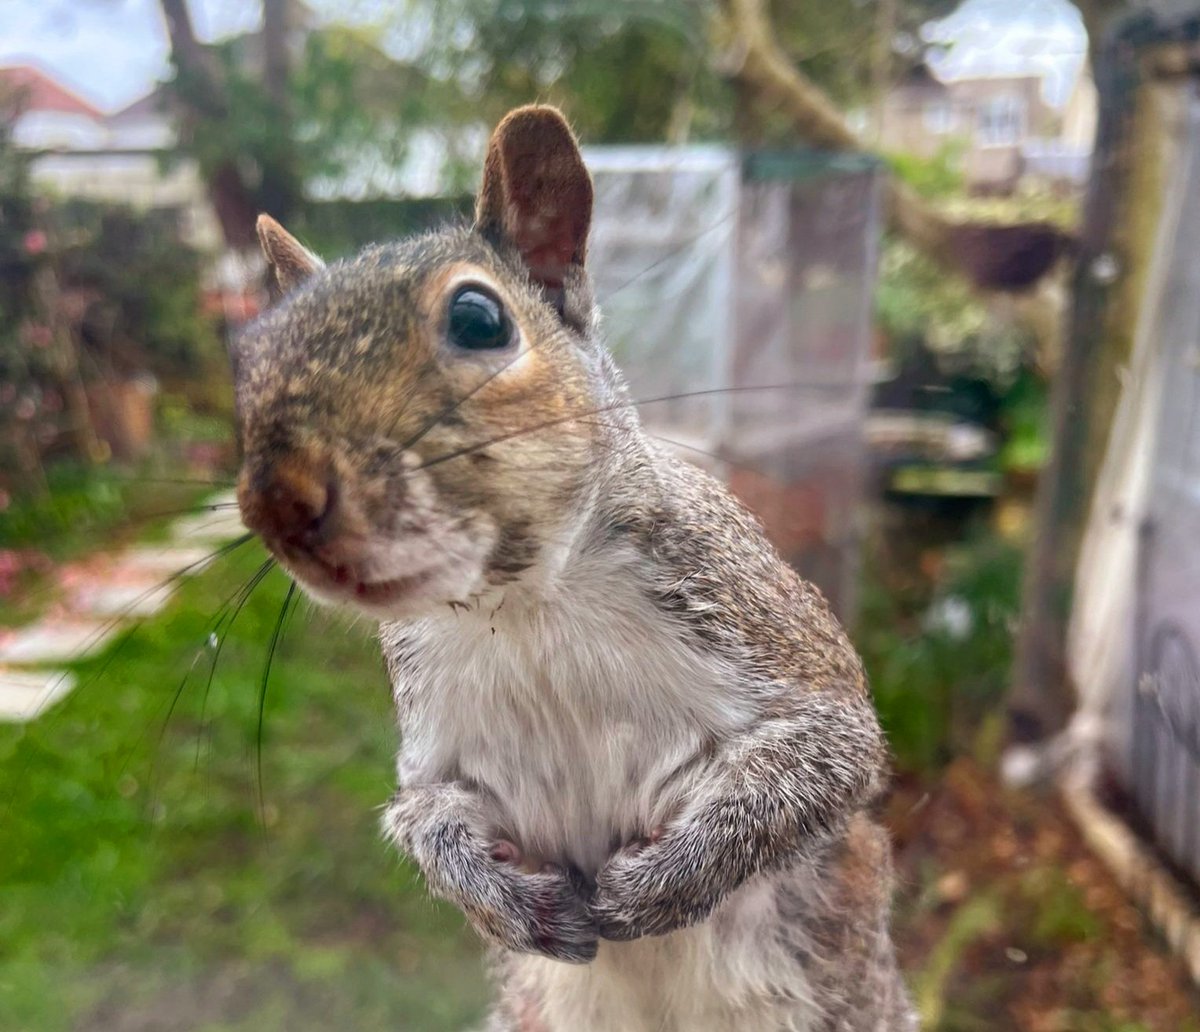 HAVE YOU GOT SOME #Crypto FOR ME? 🙂 Dear @Bodegacatonsol , @DefiGenesis showed us how to use the Phantom wallet and onboarded us to the Solana chain. Any donations for squirrel rescue would be greatly appreciated. Our SOL address is 5zHhKVHBxgCMgbThwE69ePm4DRSyKVFpZvUAe9Dpwt2f